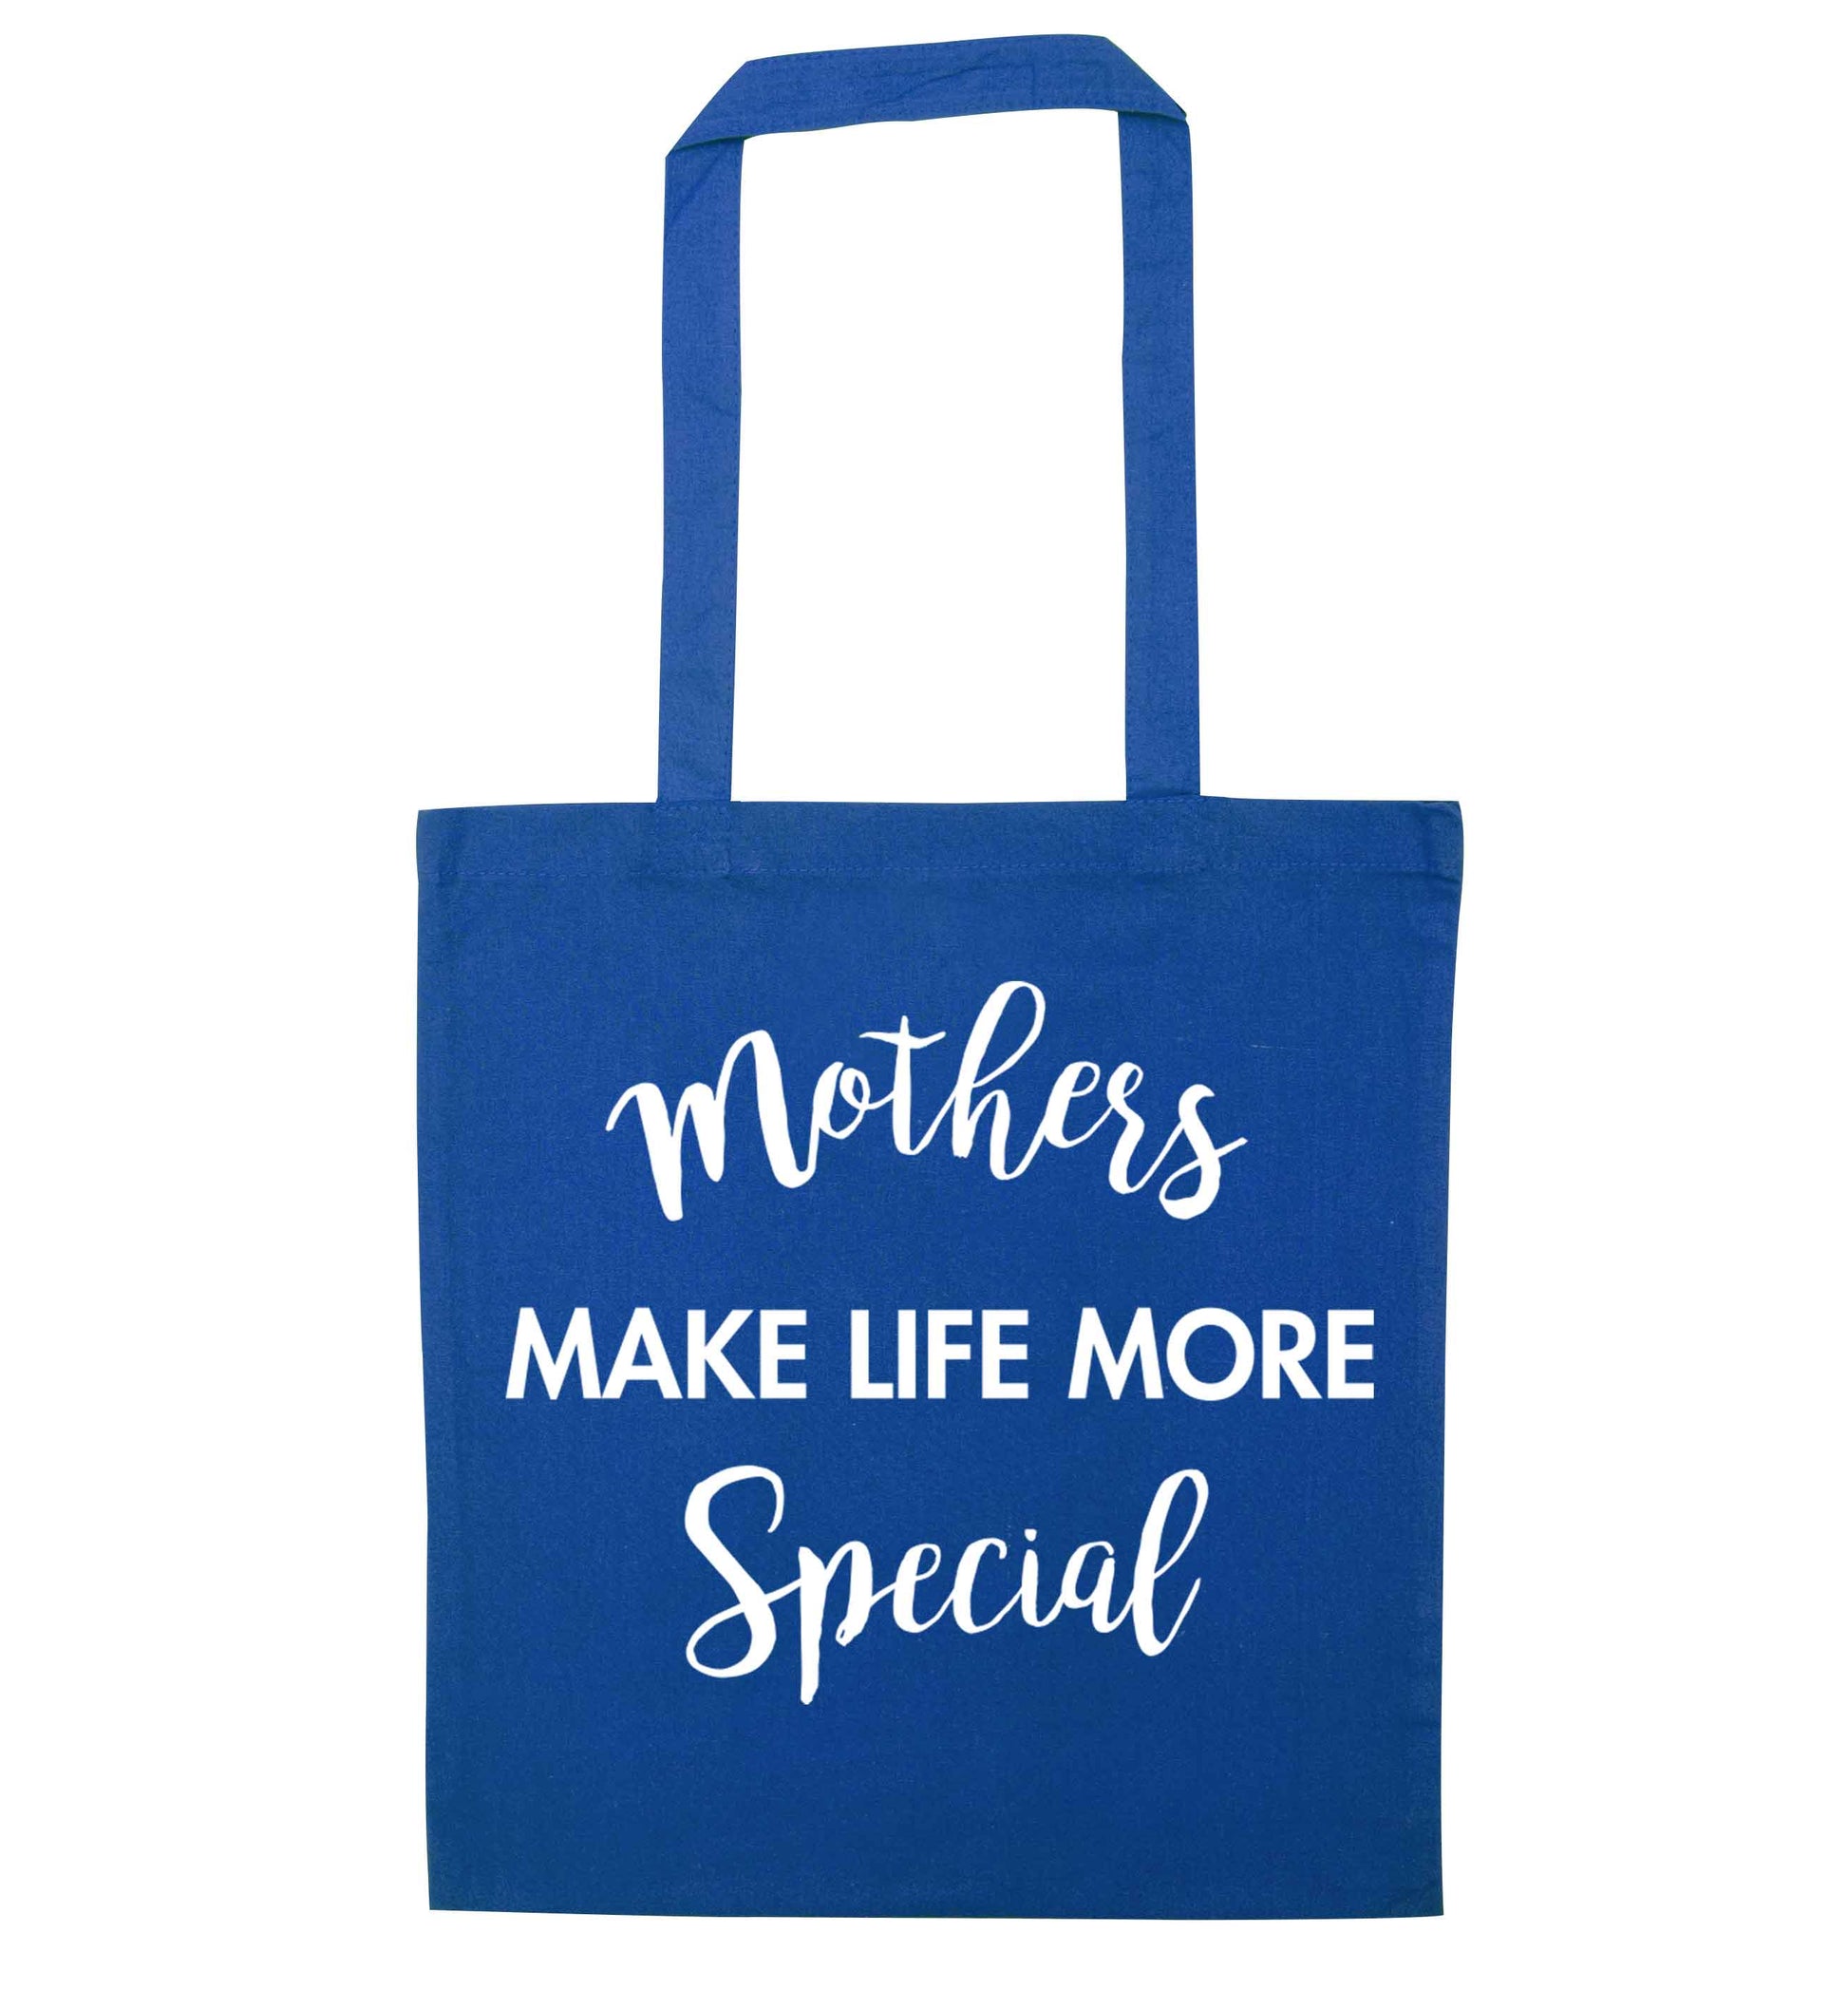 Mother's make life more special blue tote bag